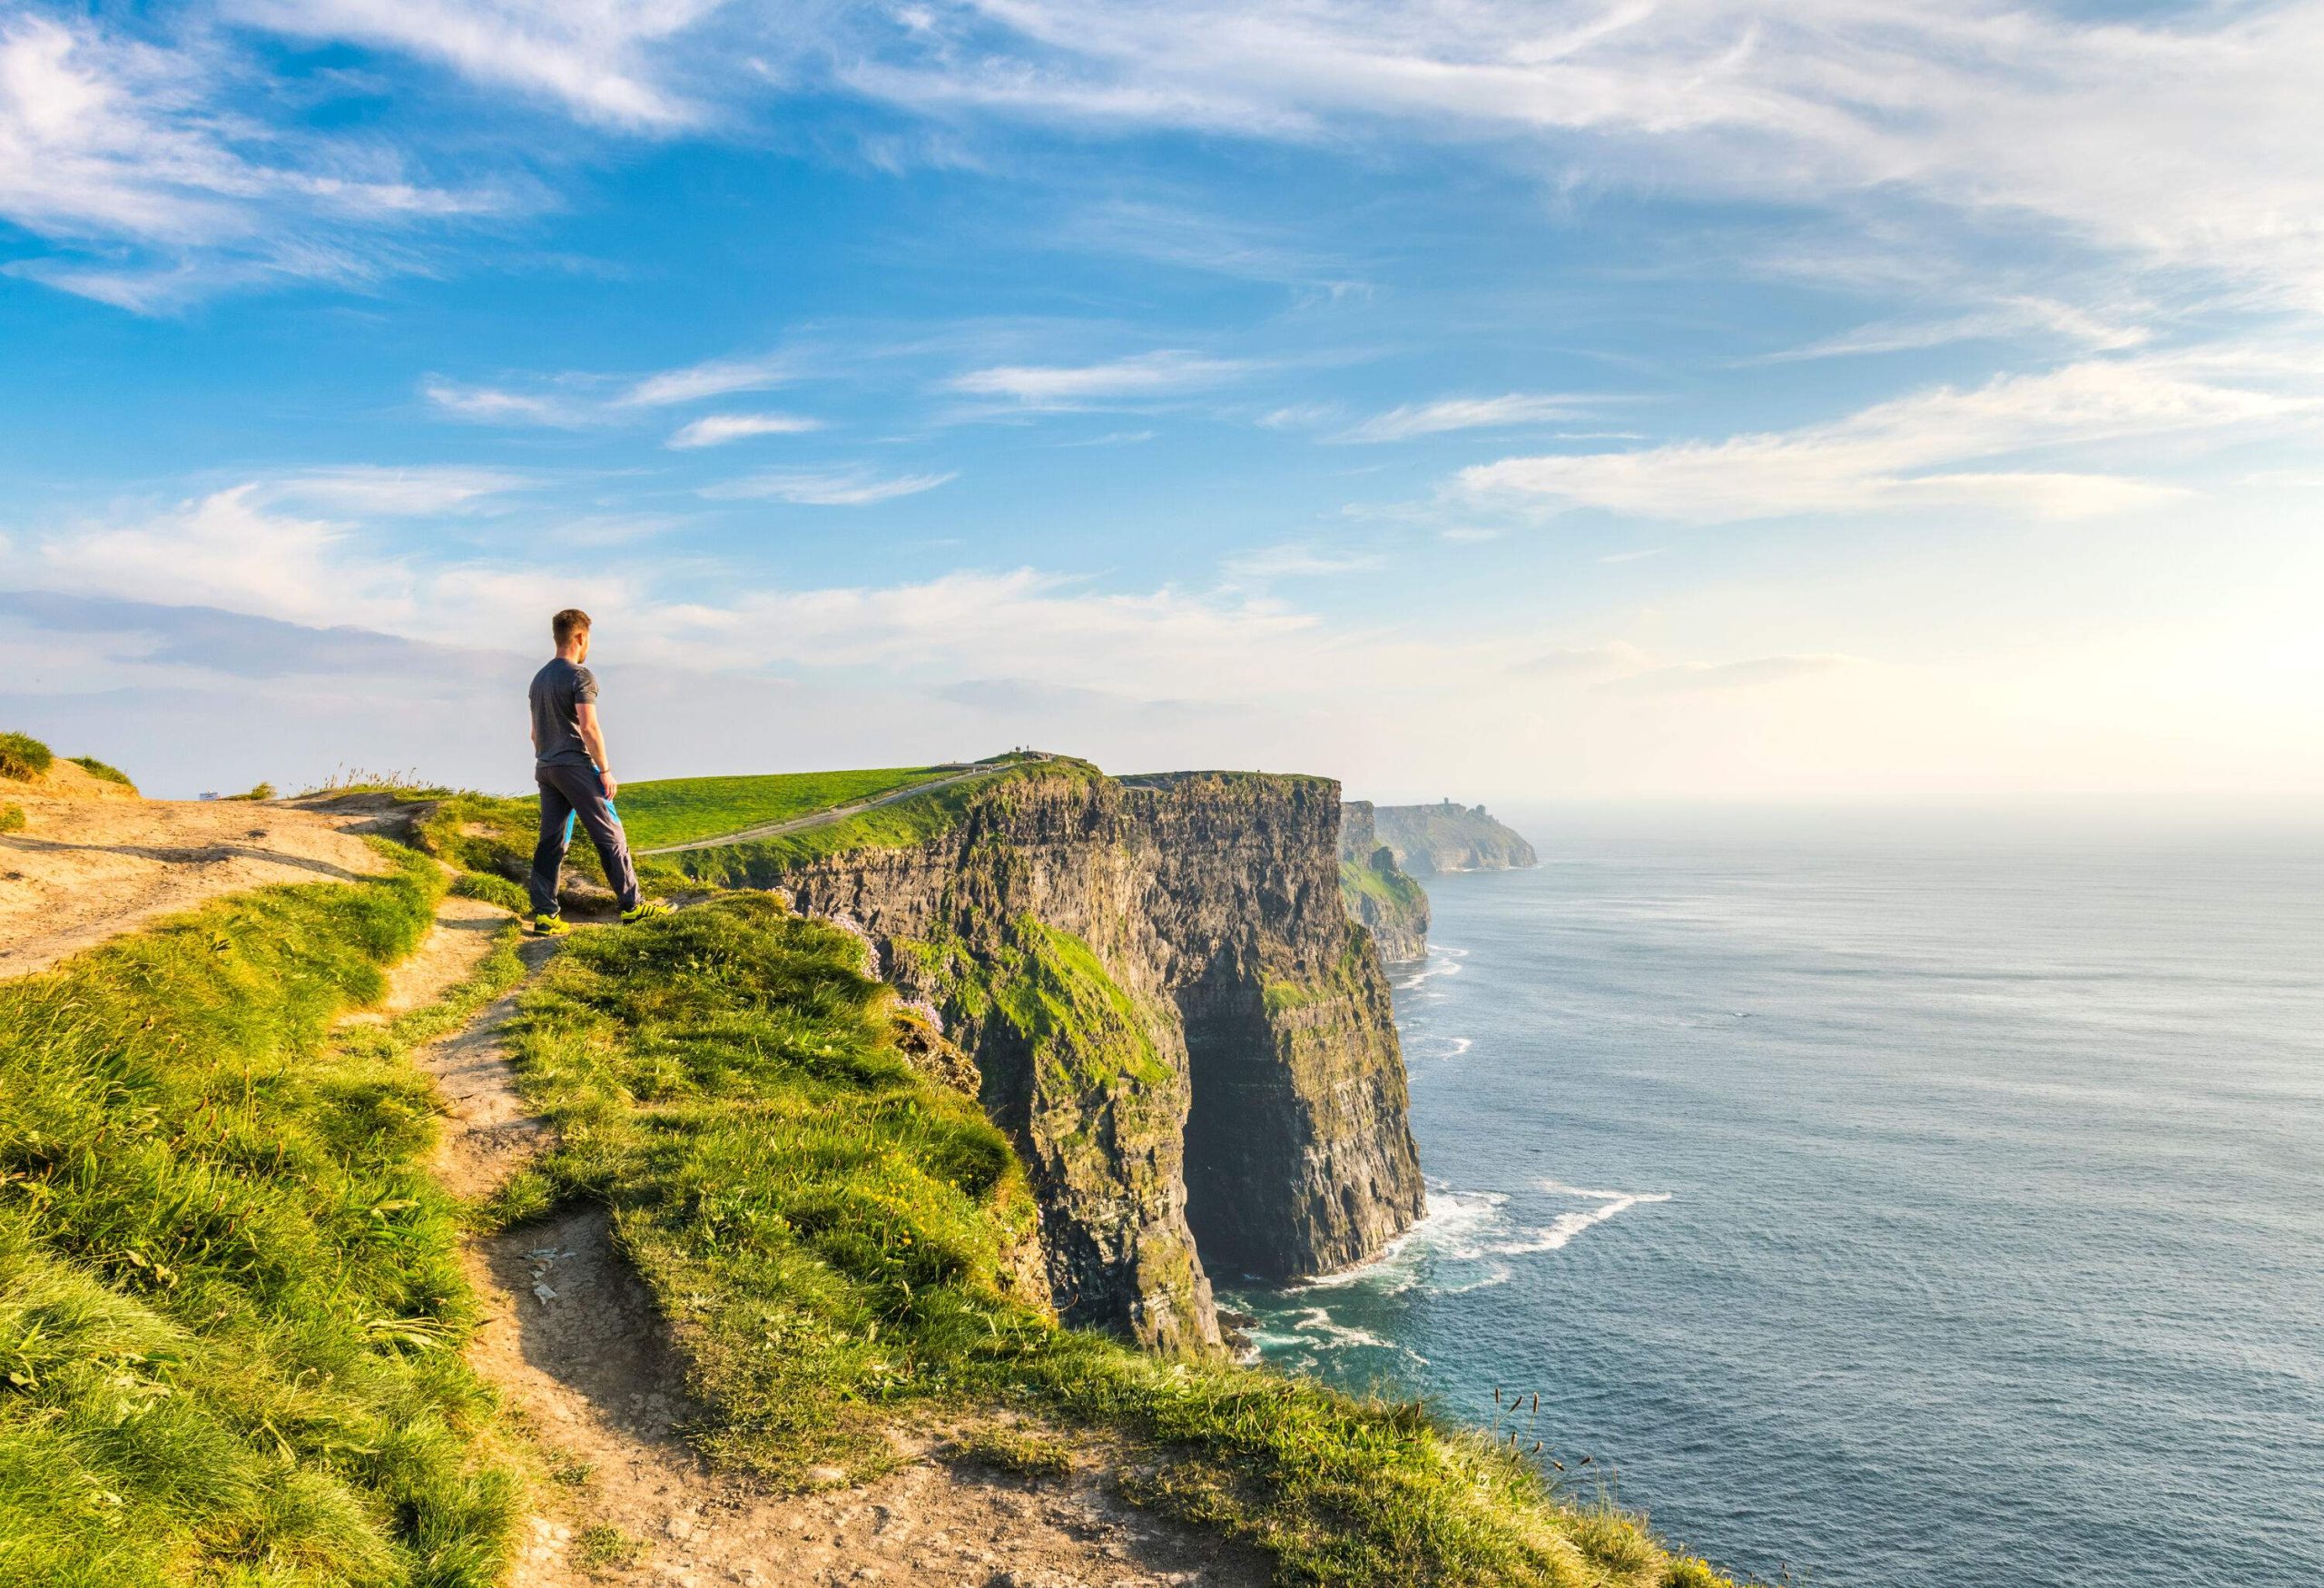 A man walking on a trail towards the edge of the Cliffs of Moher.